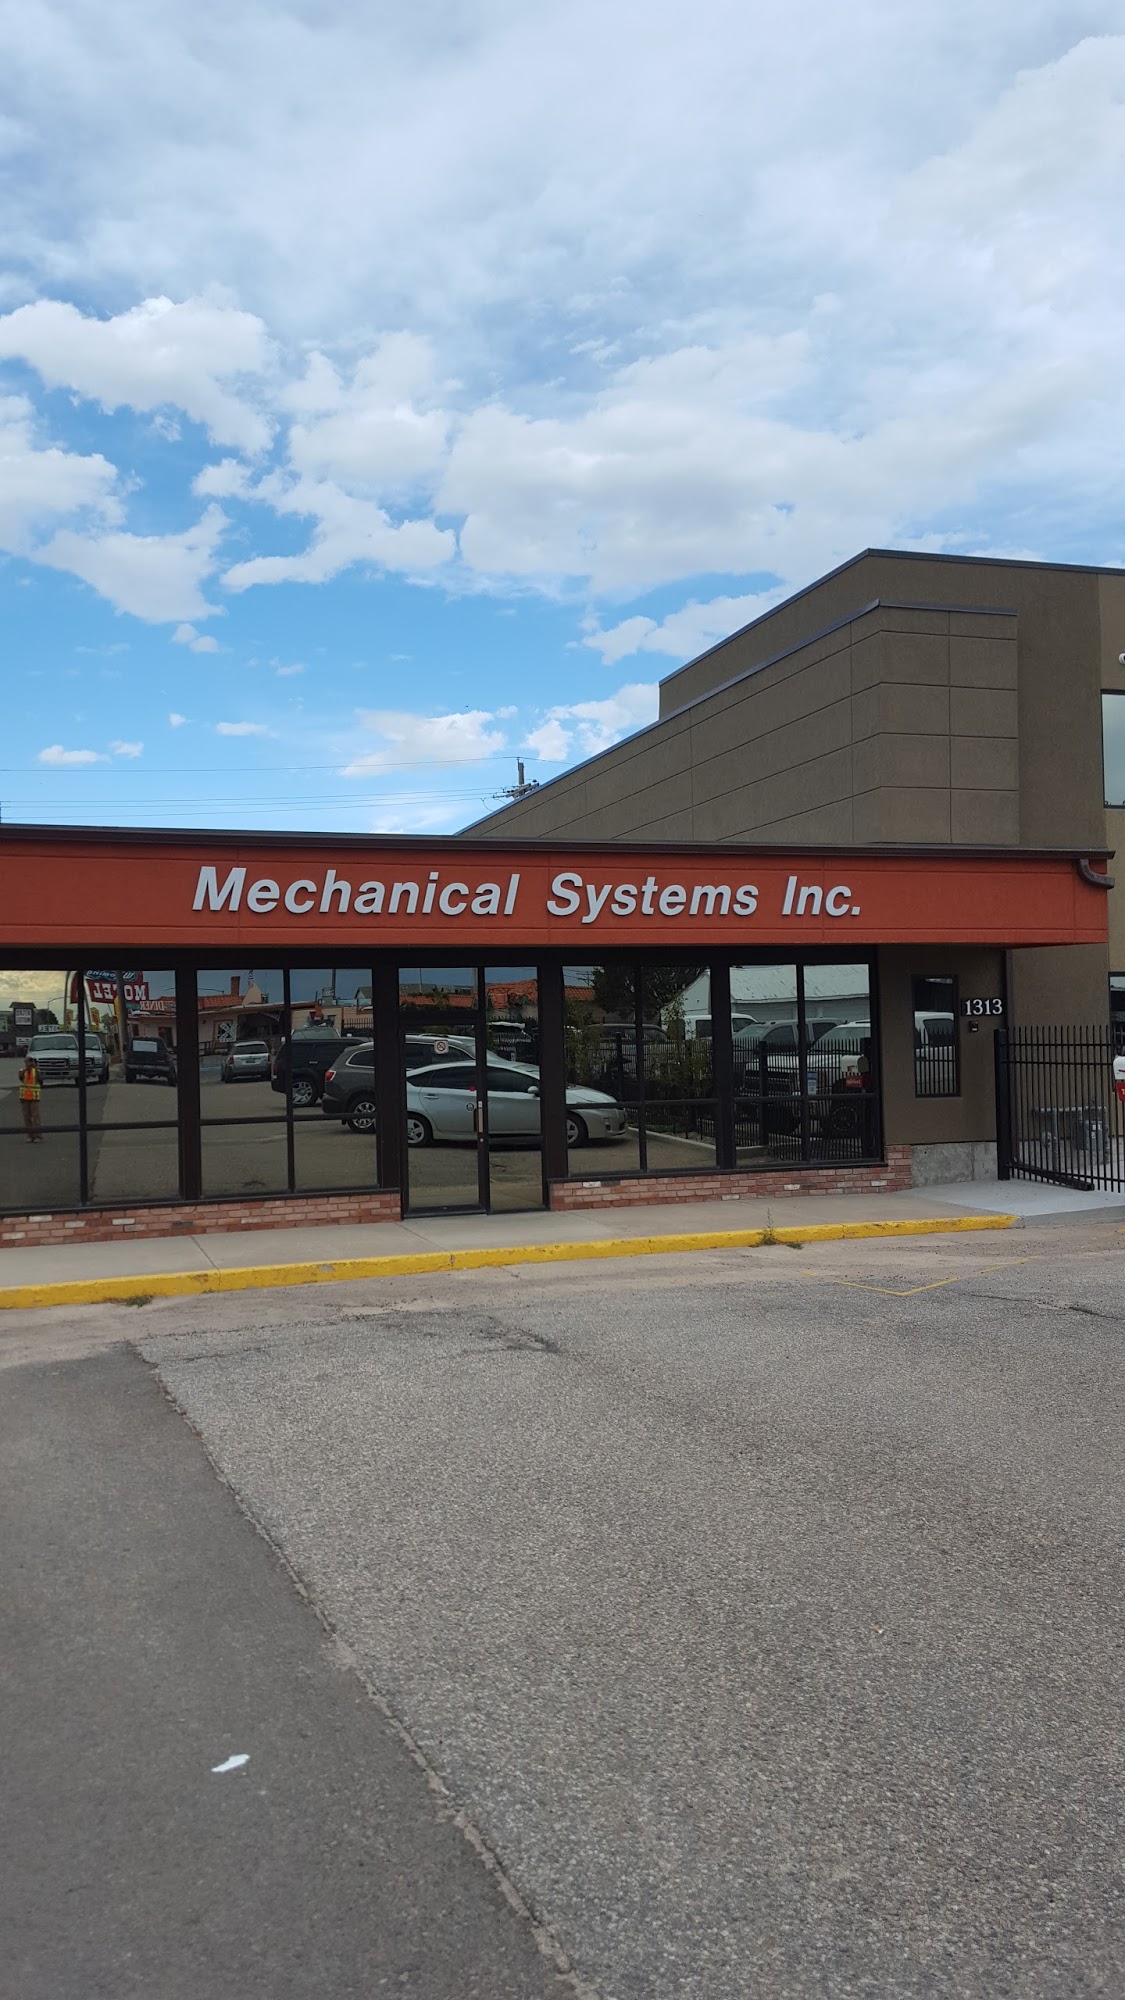 Mechanical Systems Inc